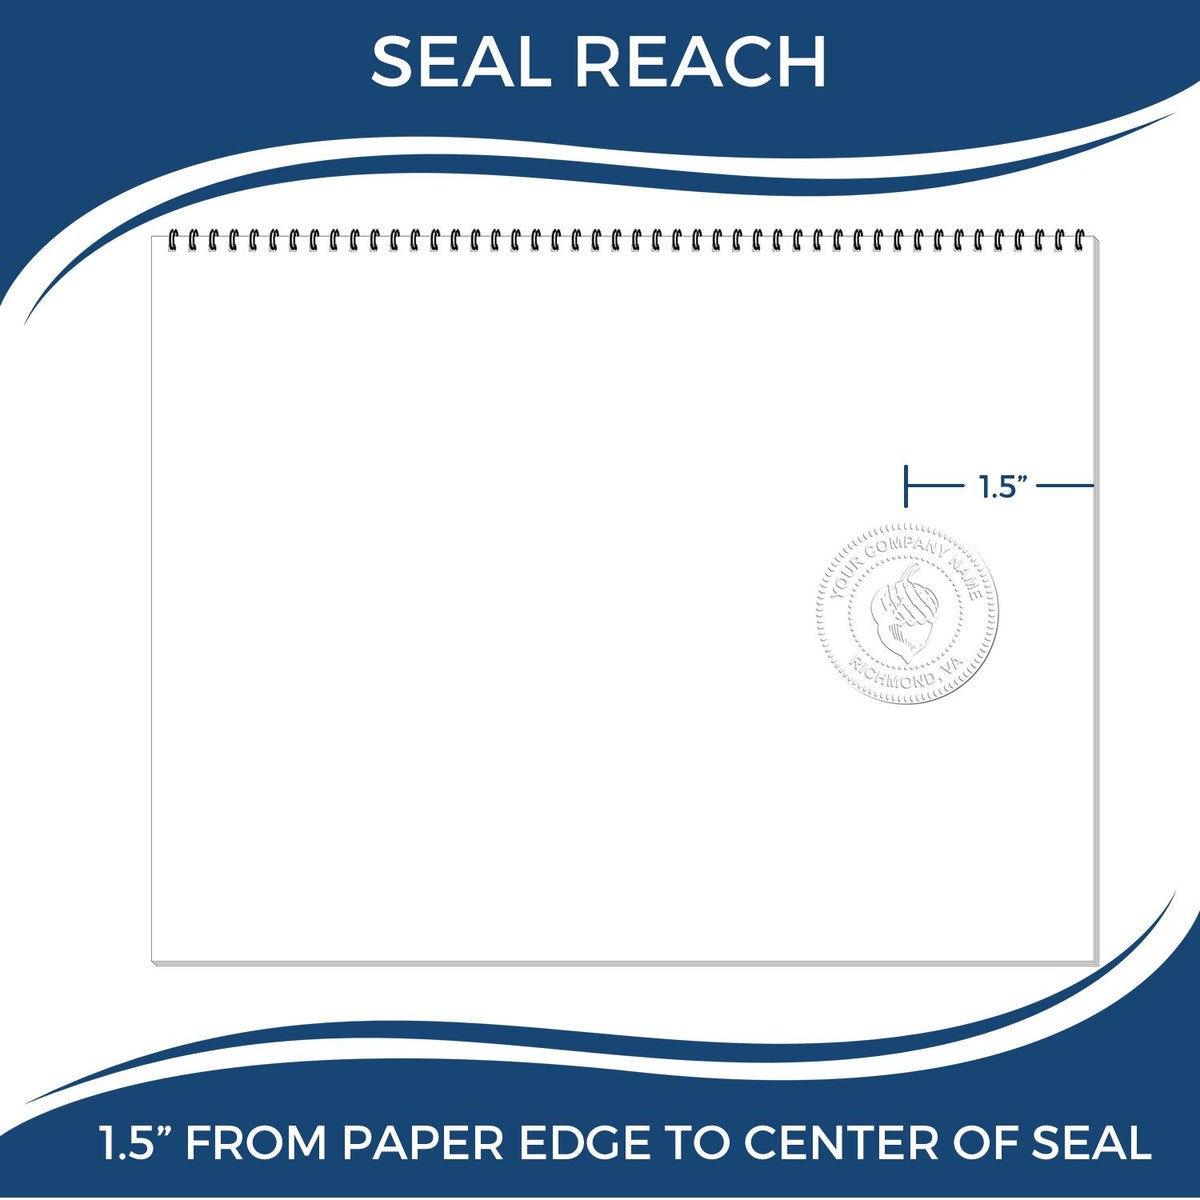 An infographic showing the seal reach which is represented by a ruler and a miniature seal image of the Soft Pocket New York Landscape Architect Embosser